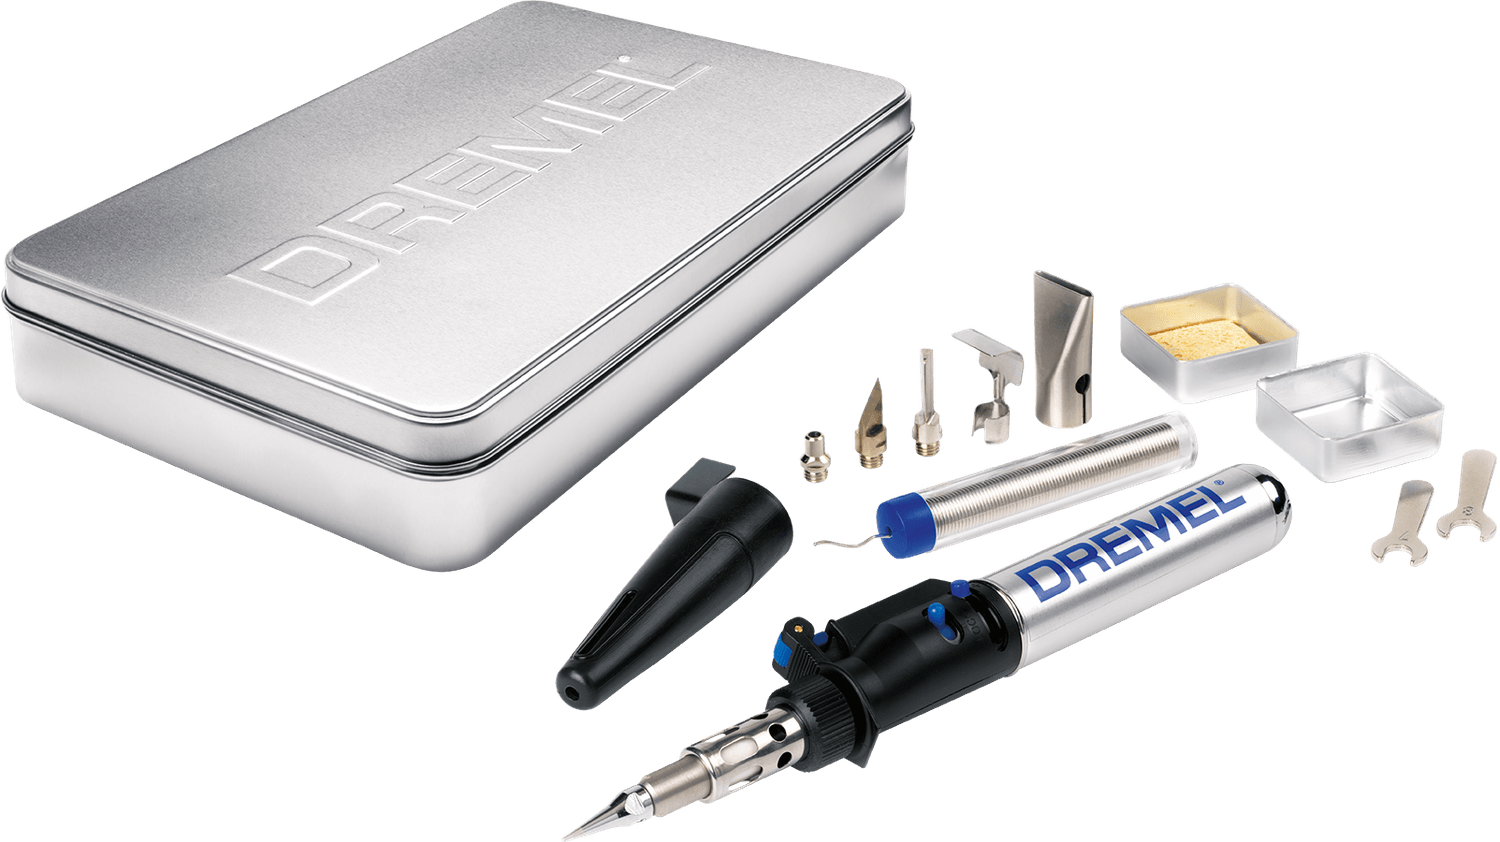 DREMEL VersaTip (2000-6) Review | Pros, Cons and Uses